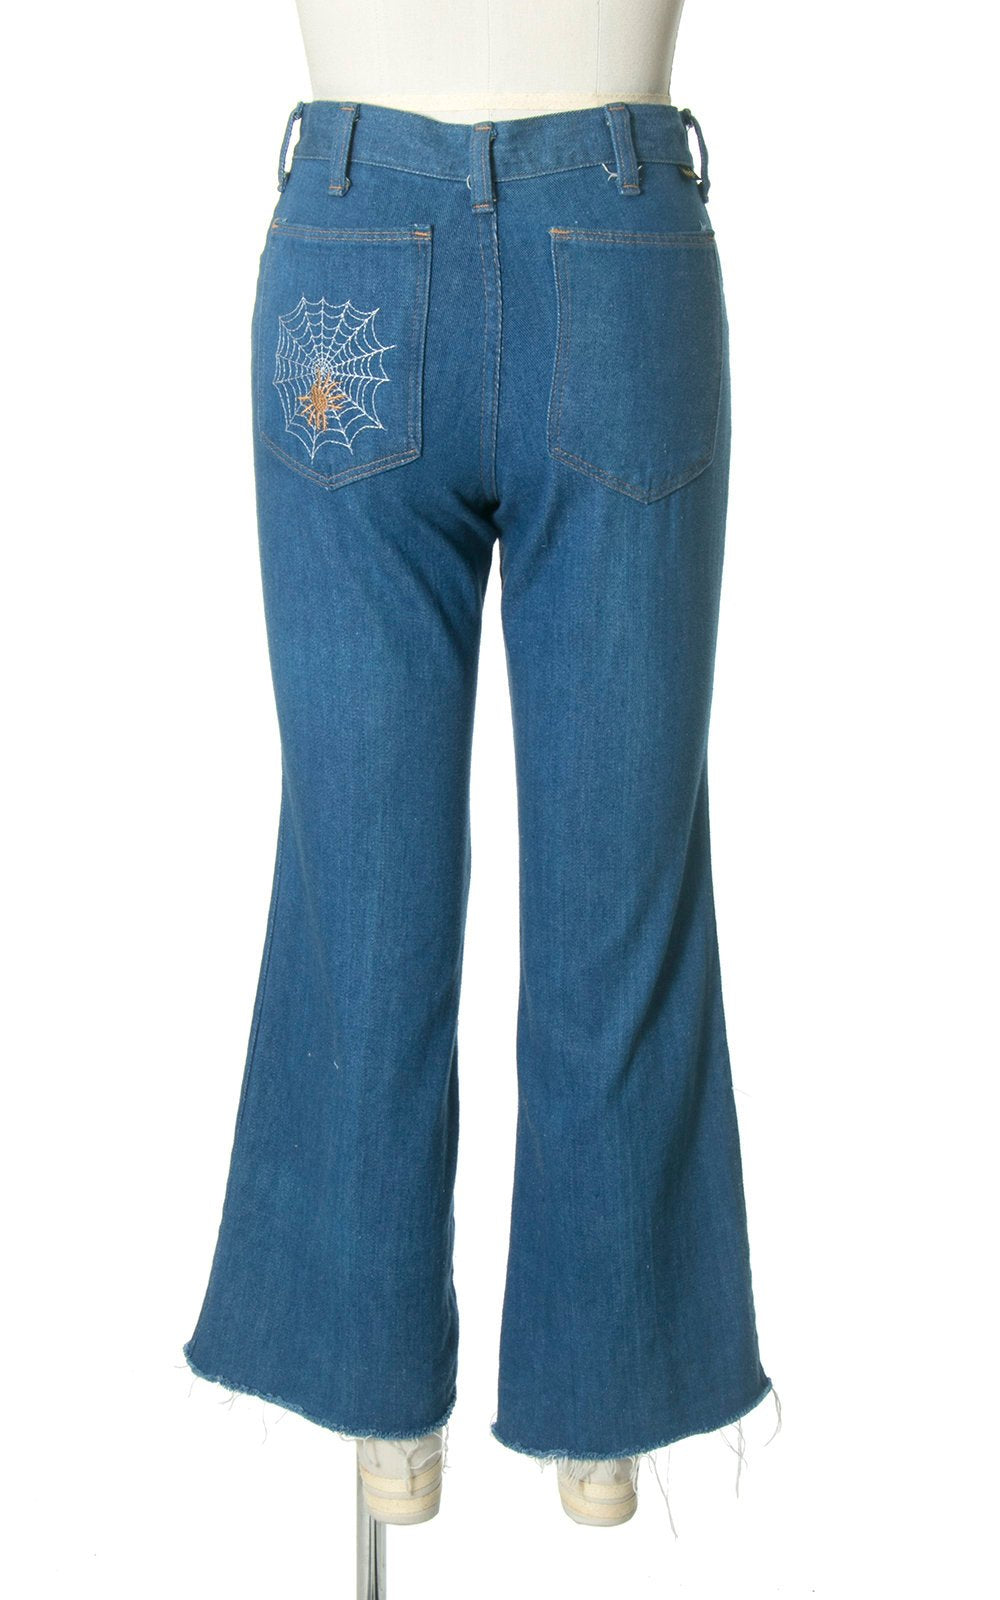 Vintage 1970s Bell Bottom Jeans | 70s WRANGLER Spiderweb Spider Embroidered Medium Blue Denim Mid Rise Pants (x-small/small)